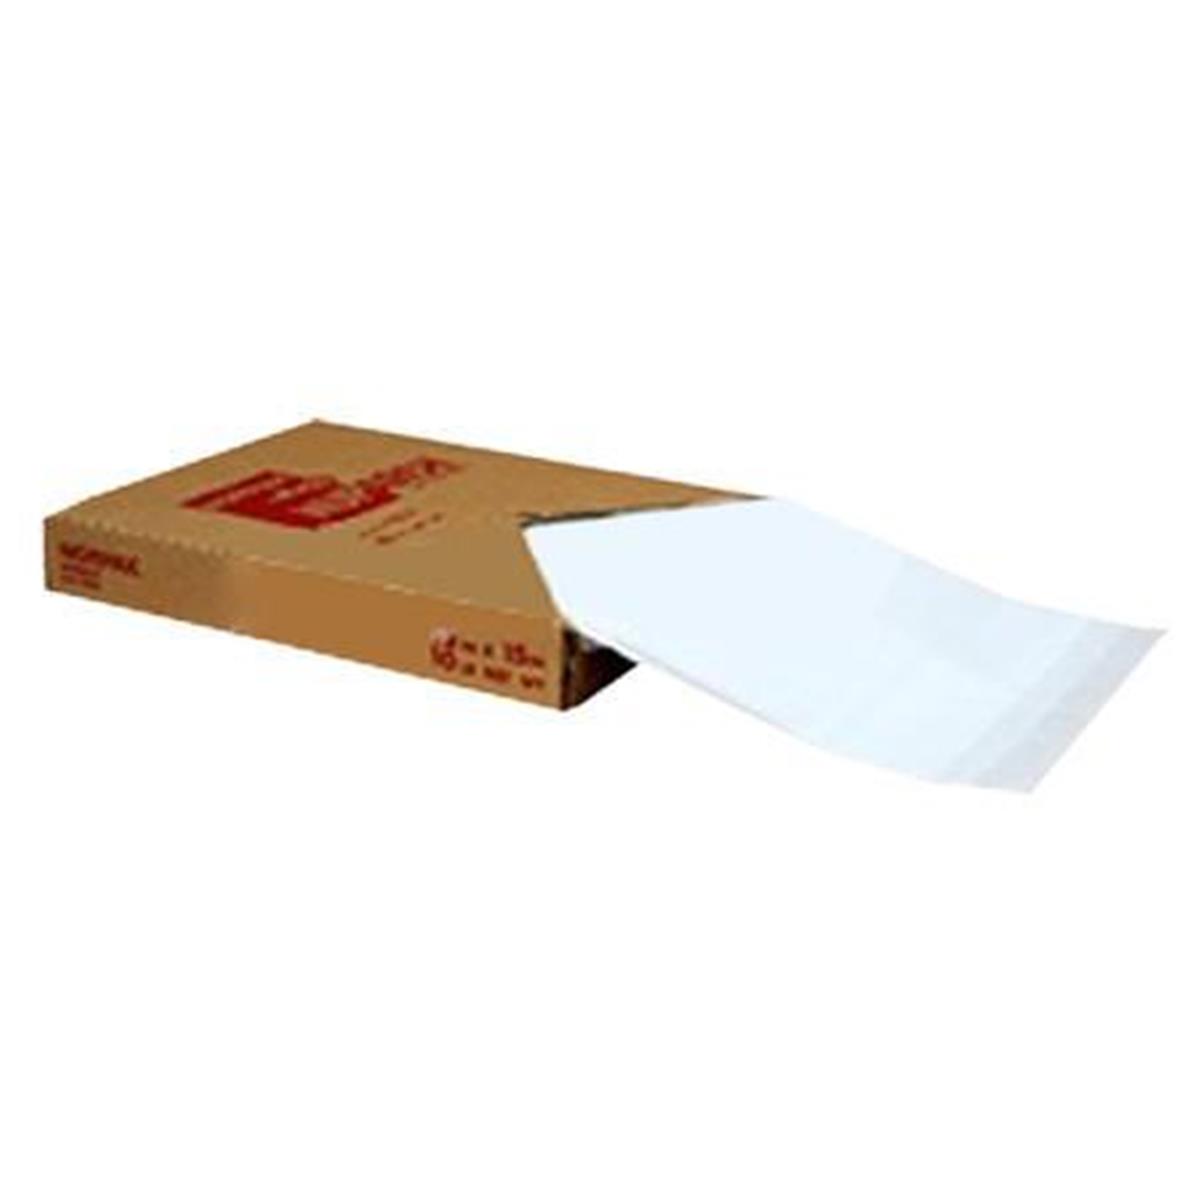 Picture of Atlas 1215WET 12 x 15 in. Wet Wax Sheets - Case of 5